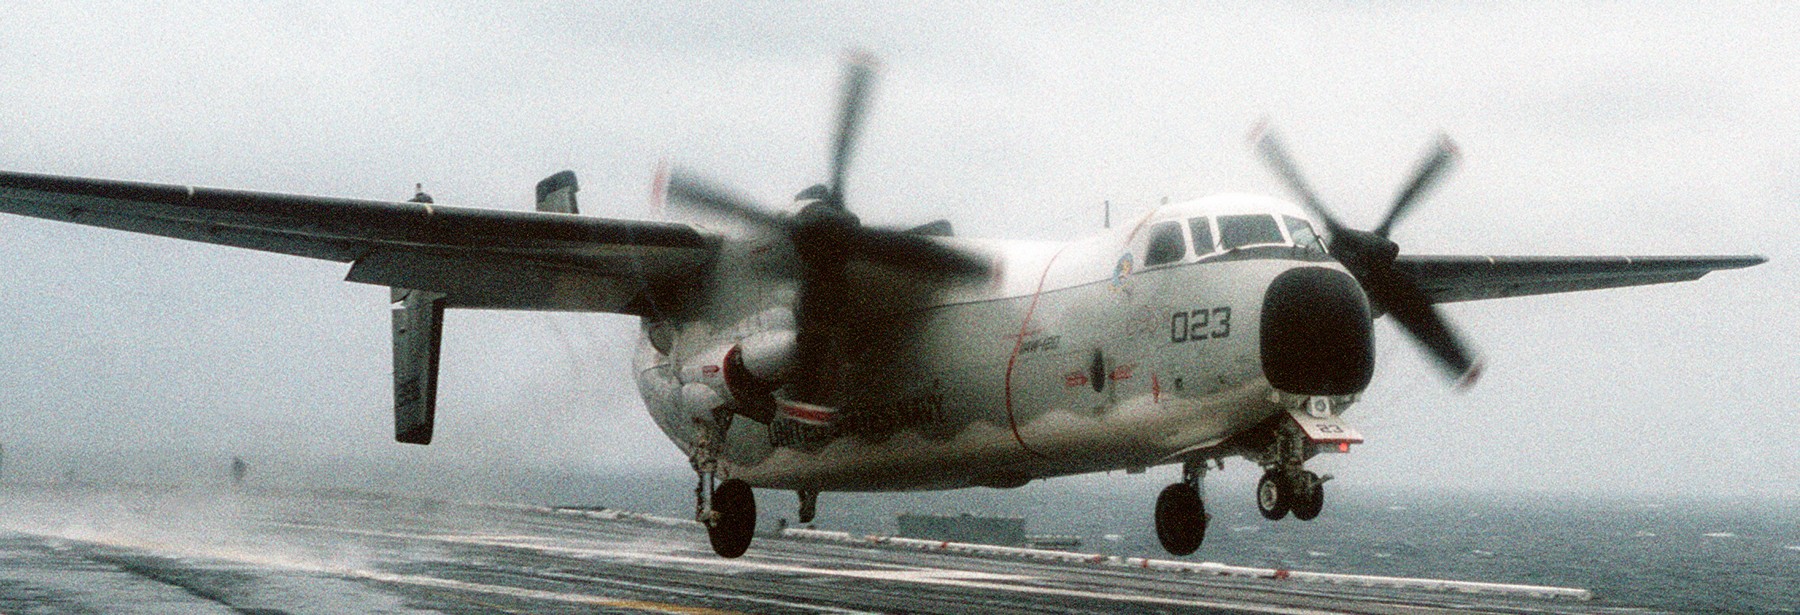 vaw-120 greyhawks carrier airborne early warning squadron c-2a greyhound replacement uss dwight d. eisenhower cvn-69 127